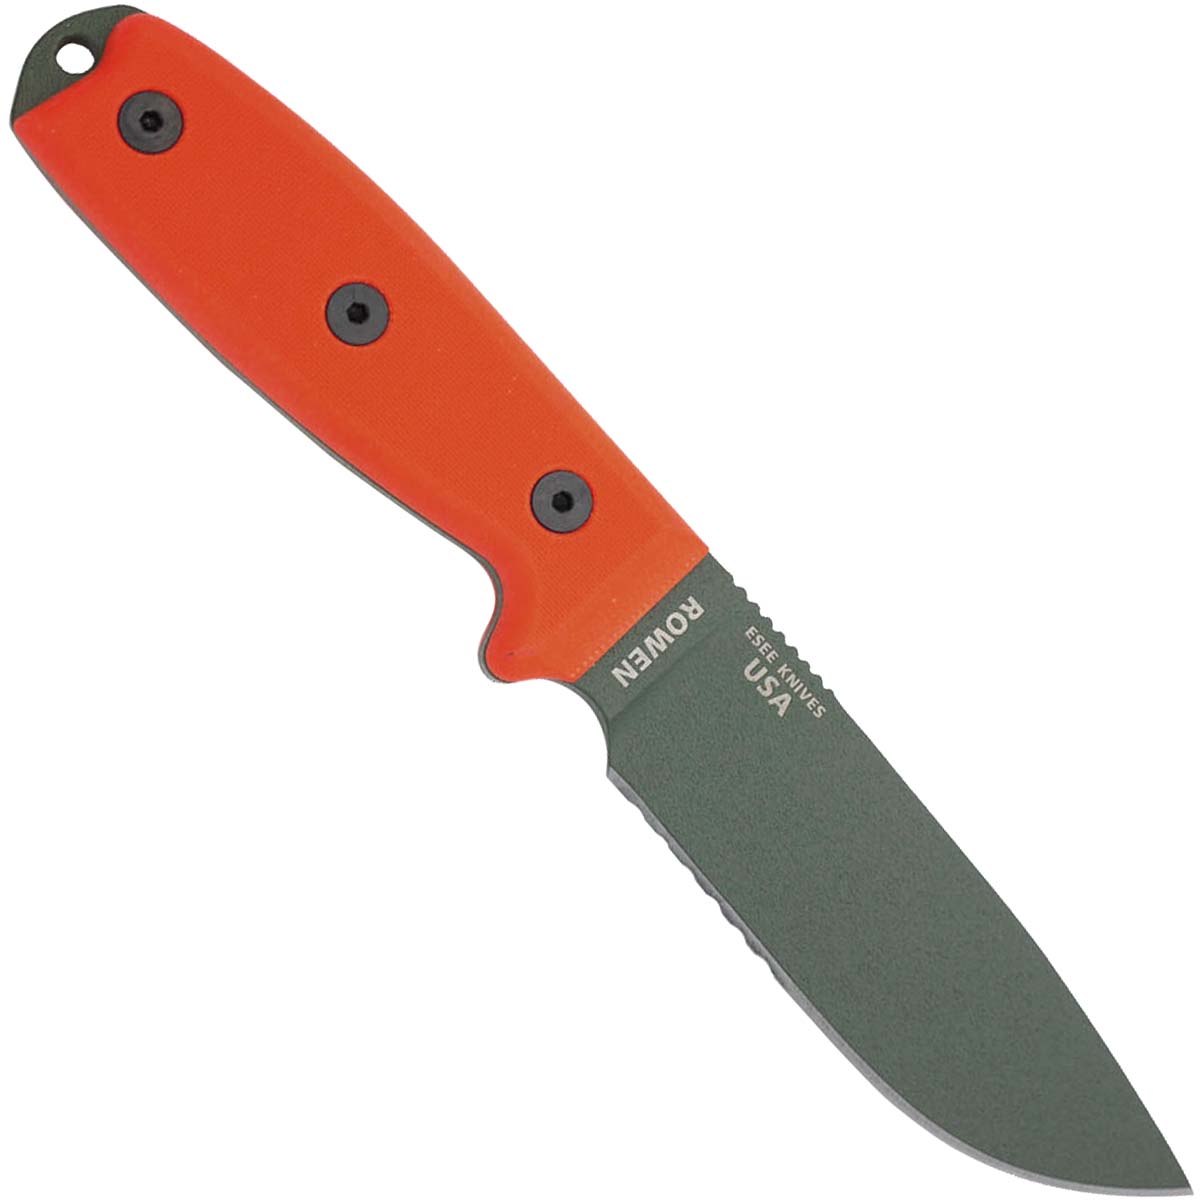 ESEE 4S-MB-OD Foliage Green with Orange G10 Handle Knife